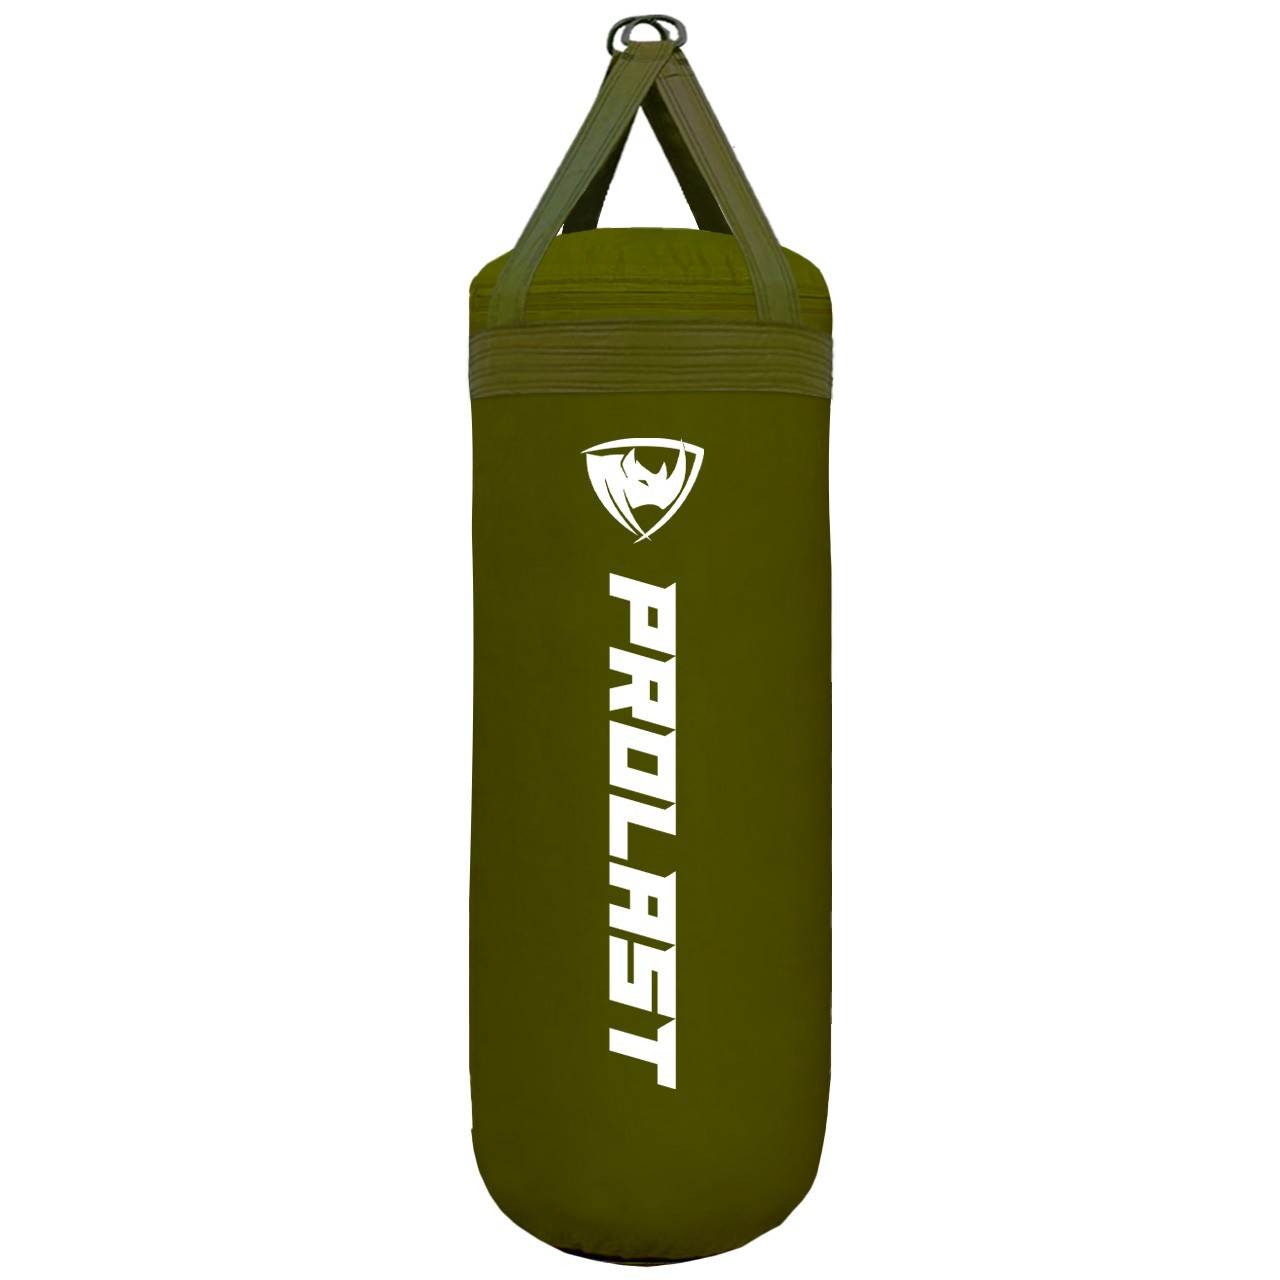 Classic XXL 150 lb Heavy Boxing Punching Bag Olive Drab Made in USA